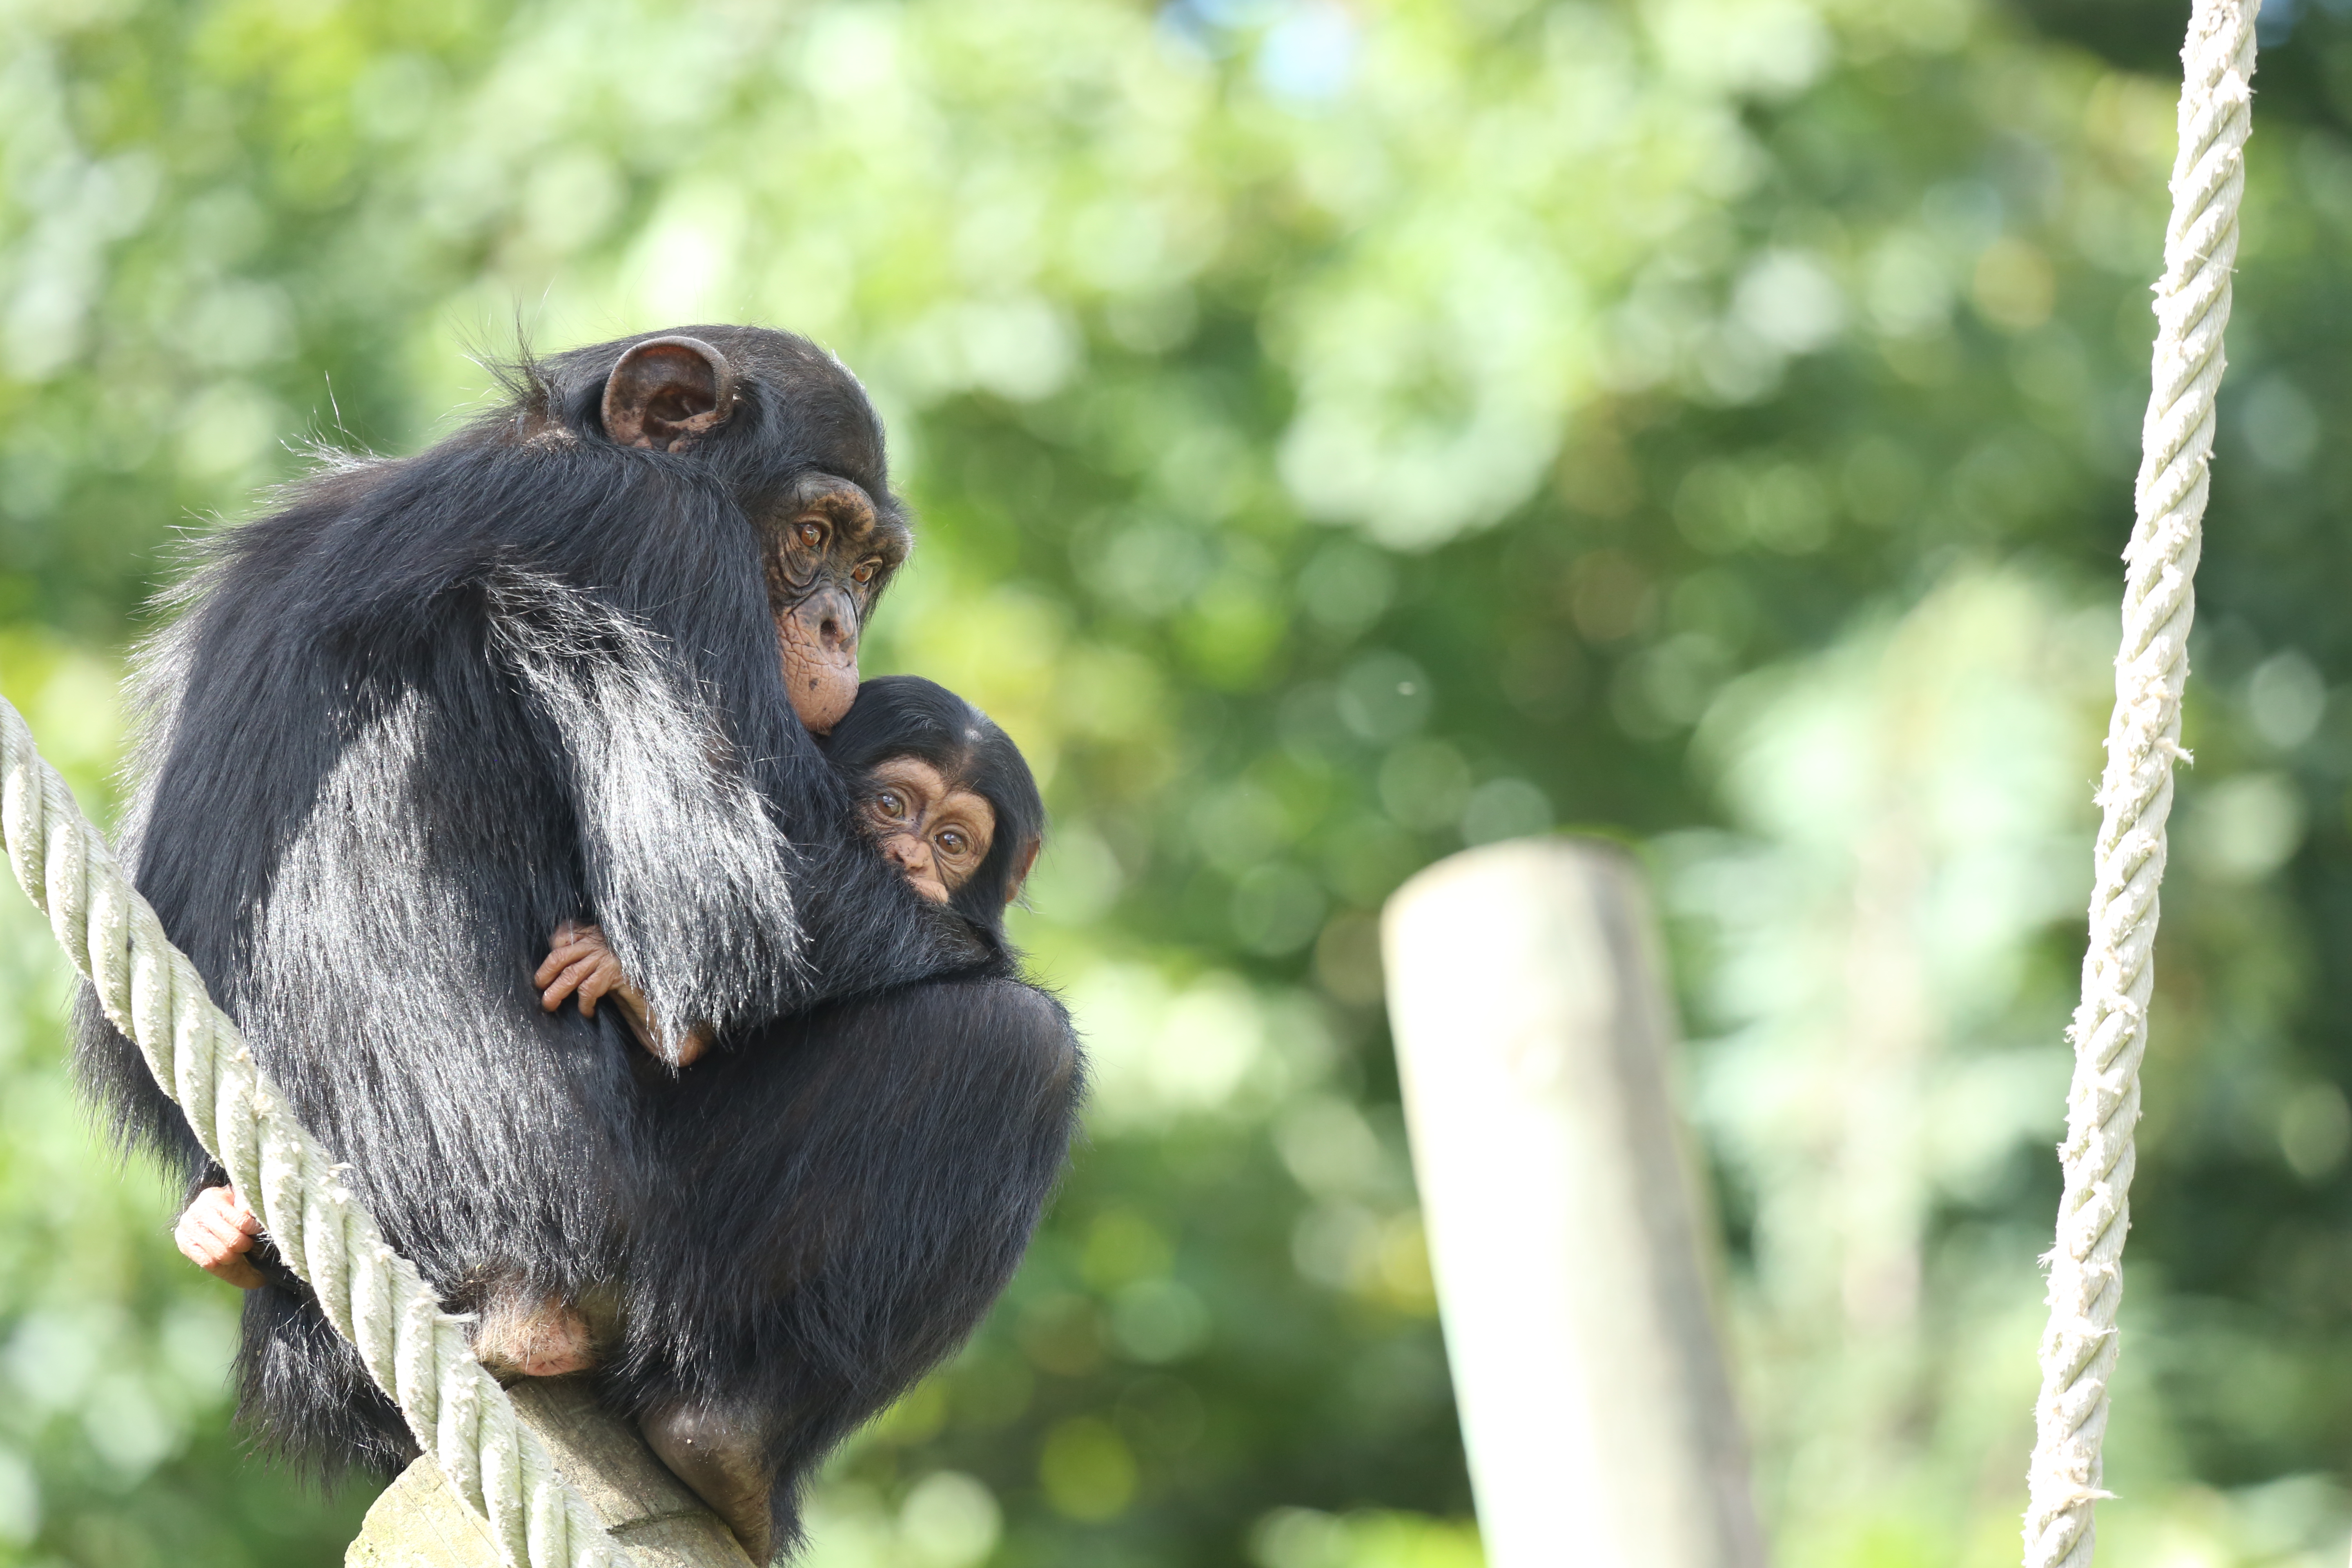 Two bonobos, a big and a small one, cling to each other, balanced on a post, with a rope running behind them.